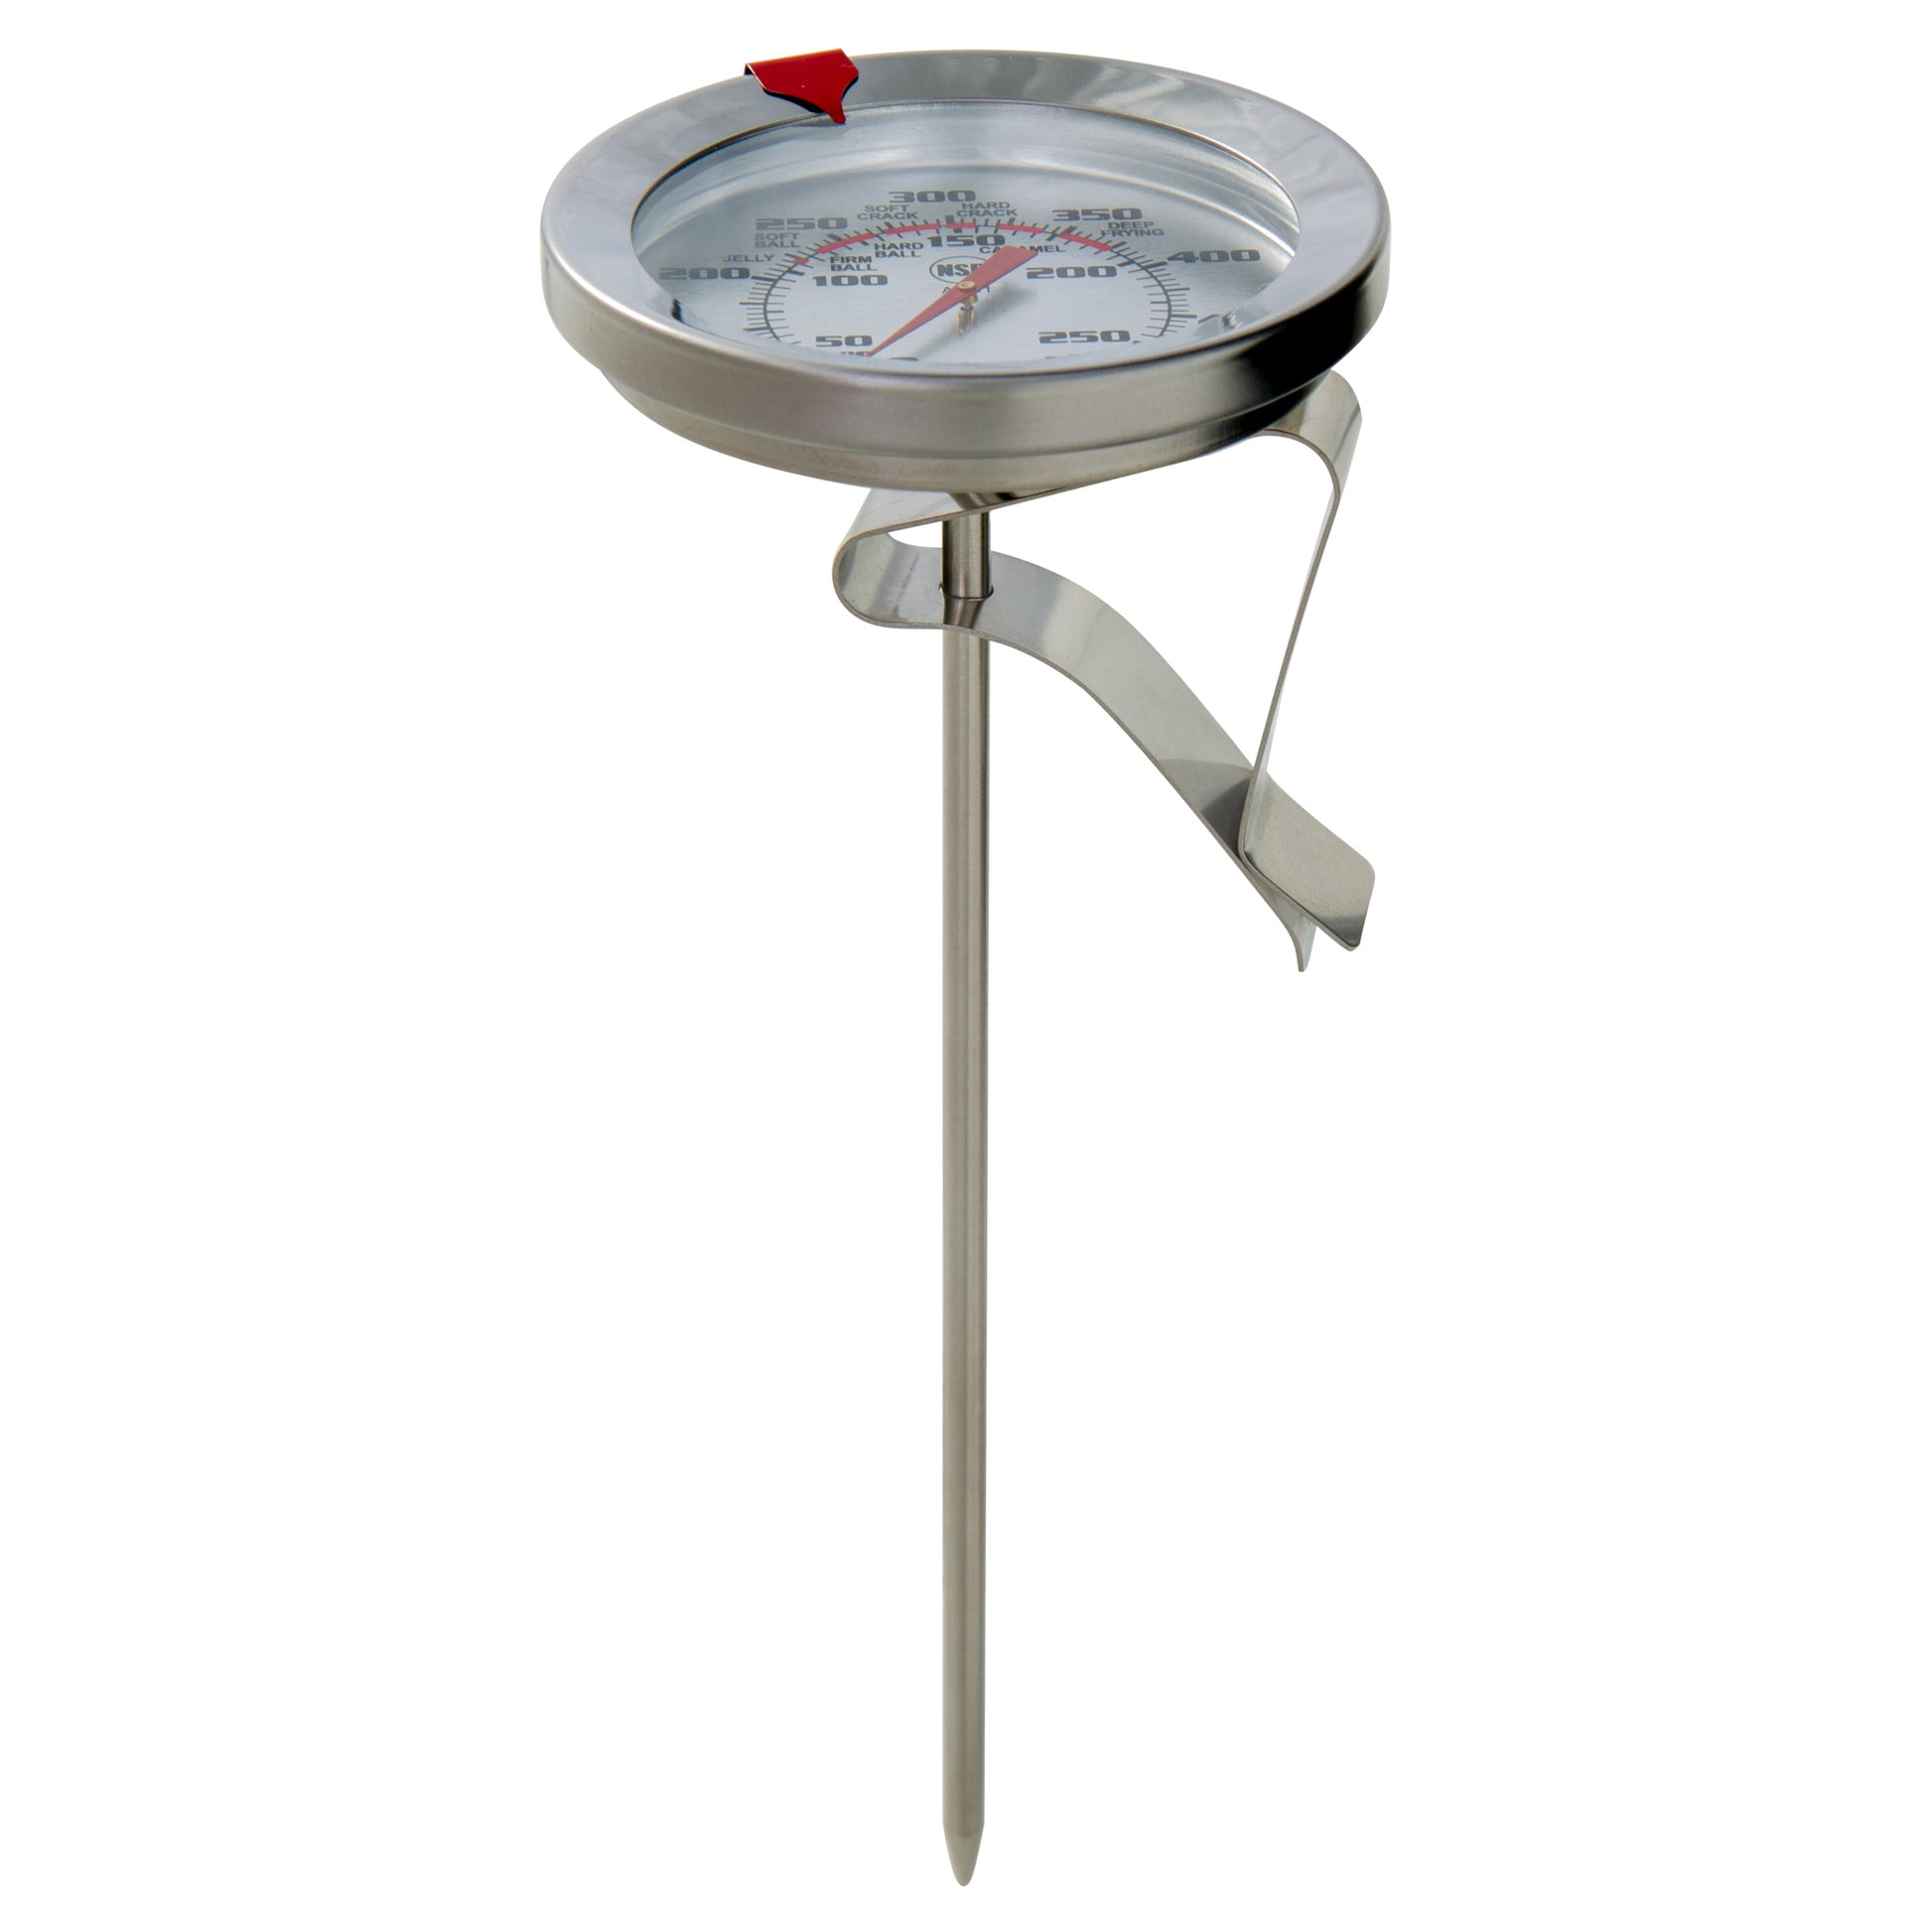 Dial Thermometer Candy/Deep Fry Thermometer with Instant Read